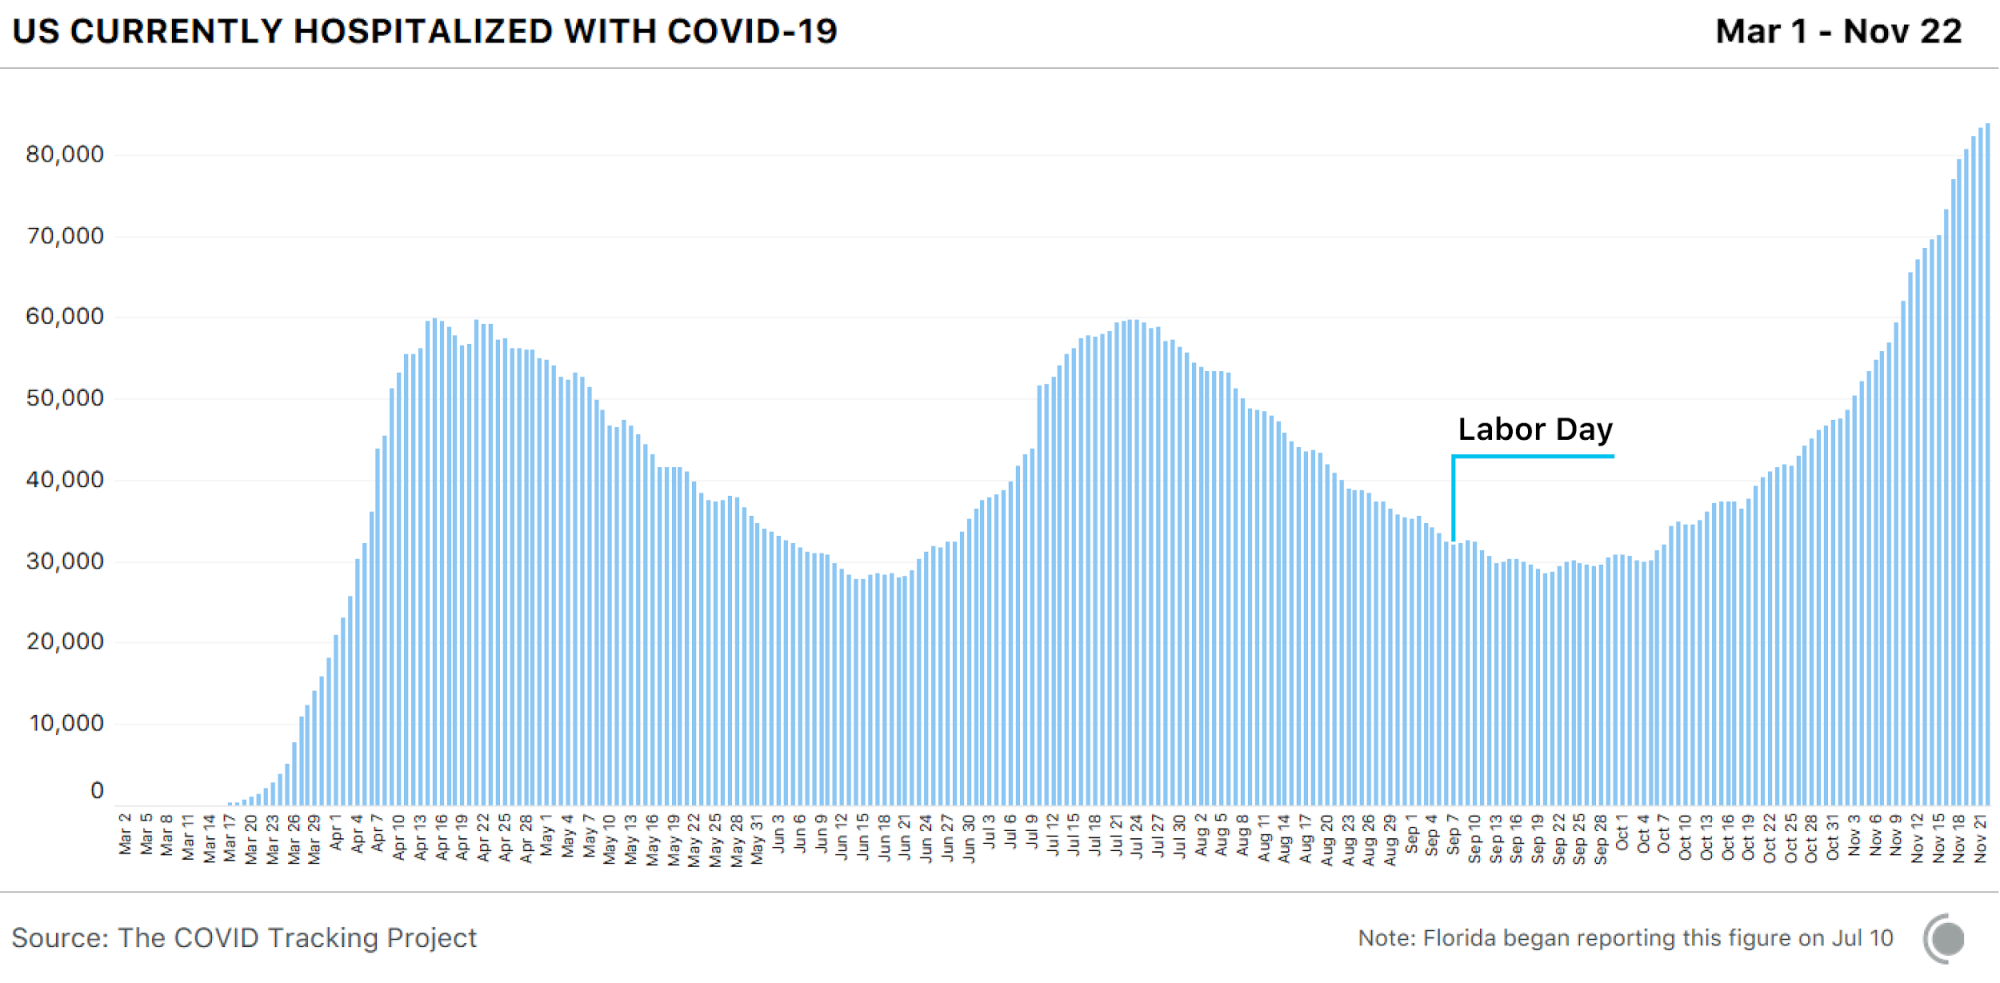 Bar chart showing US currently hospitalized from COVID-19. These are at record highs over the past week. The data was generally not affected by the Labor Day holiday.